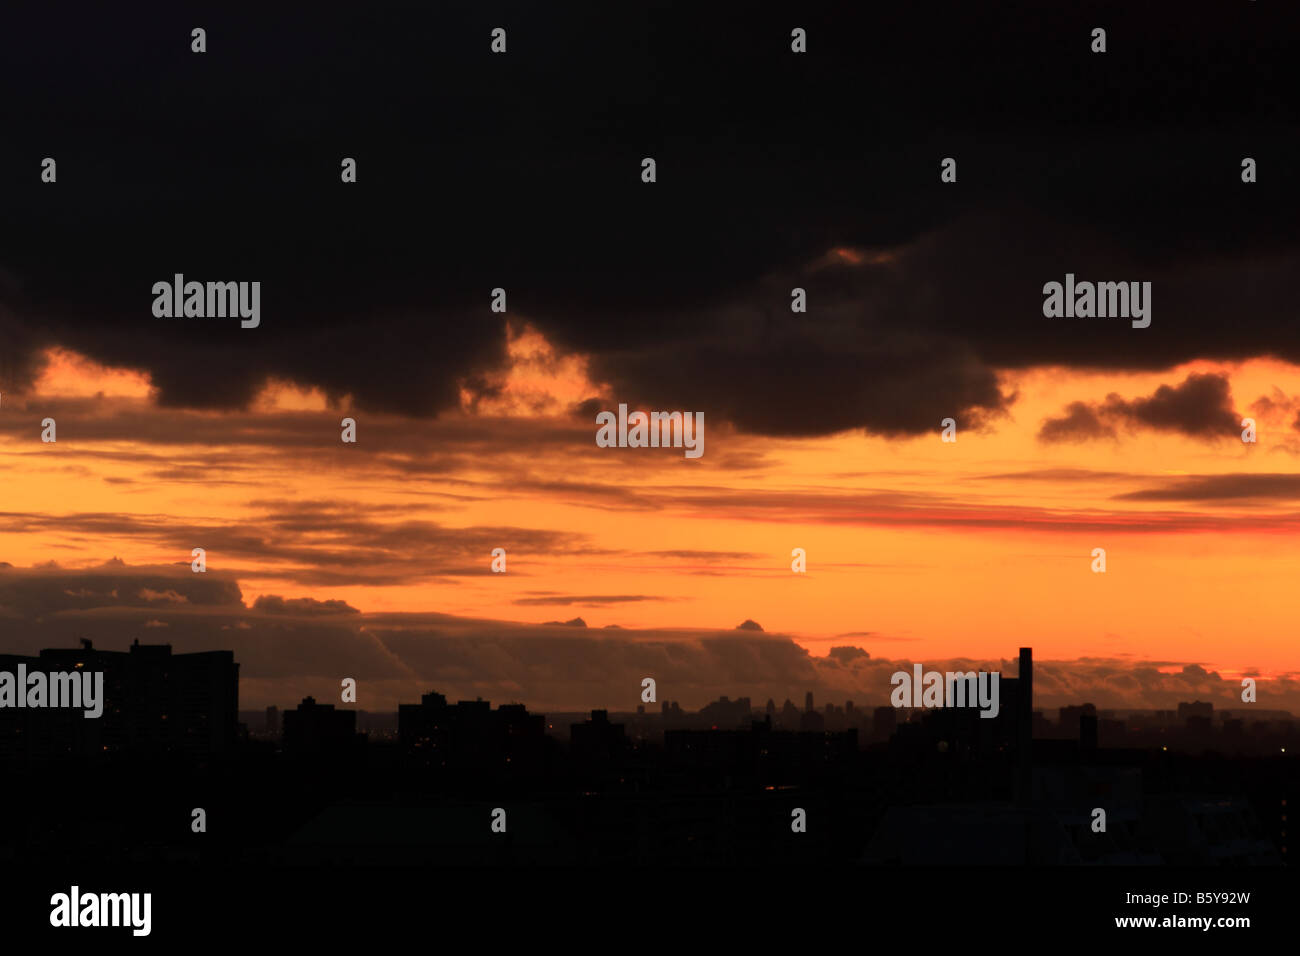 Sunset over silhouettes of west Toronto with dark threatening stratocumulus clouds associated with air mass behind cold front Stock Photo